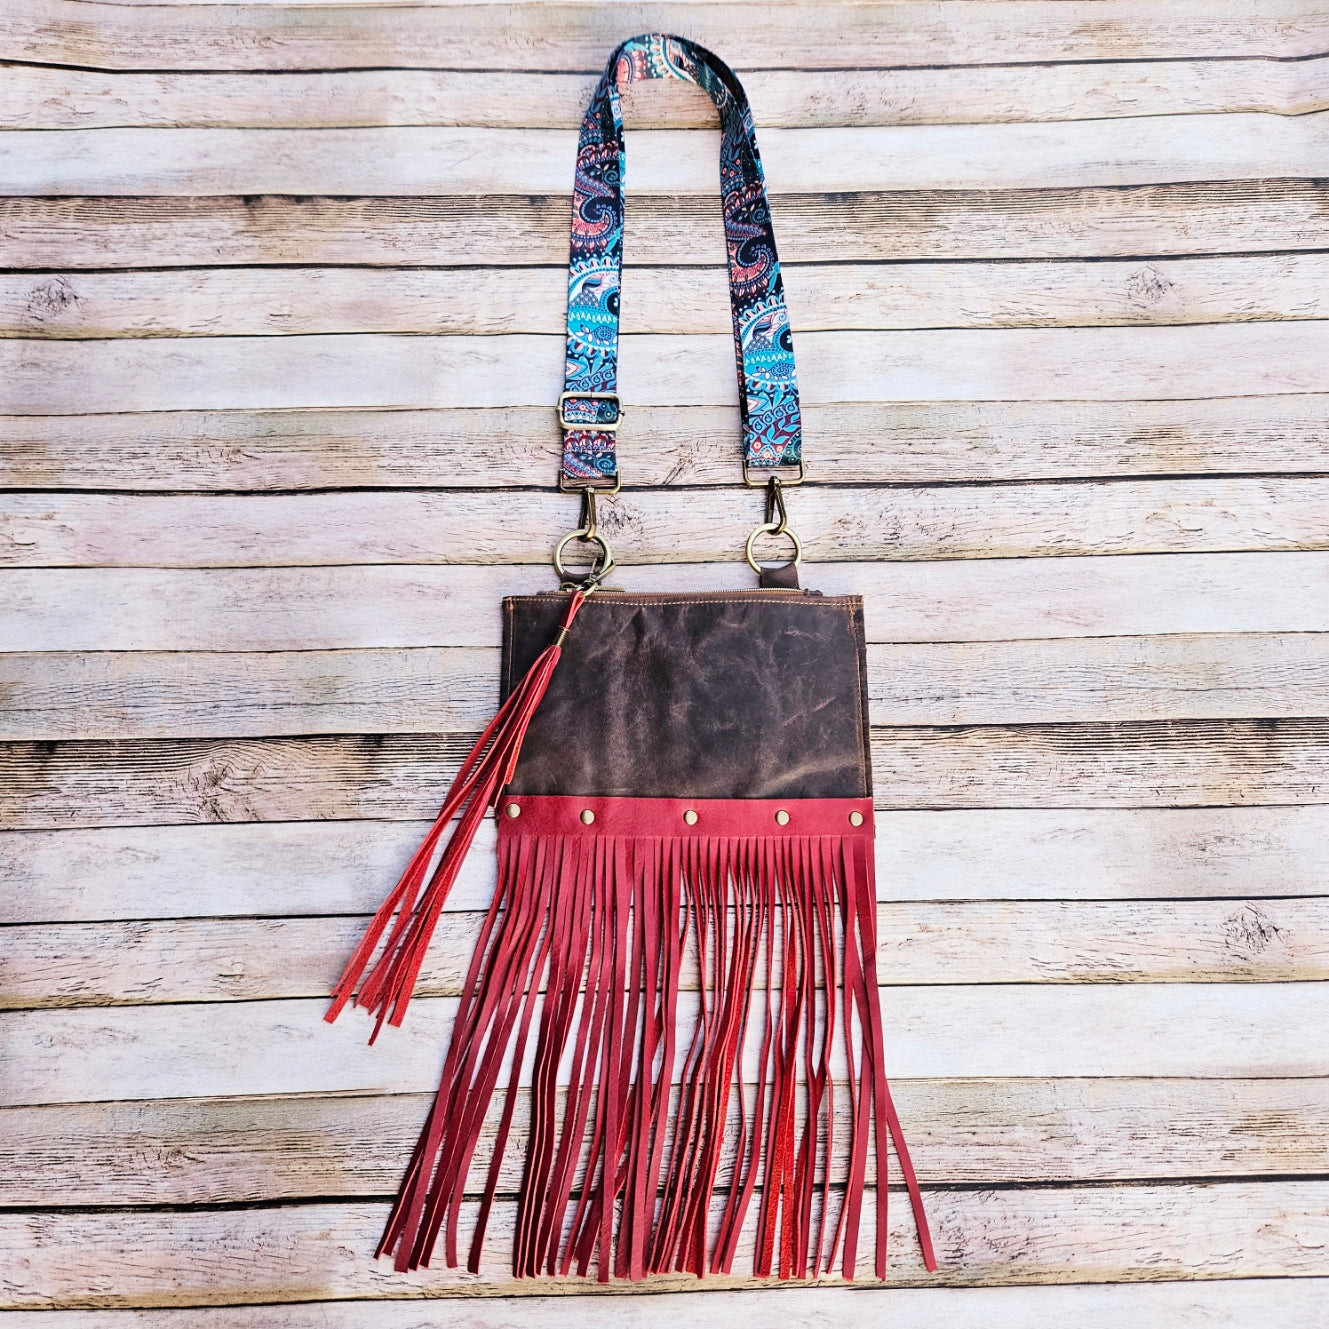 Conglomerate Cowhide & Leather w/ Fringe Shoulder & Crossbody Purse Ha